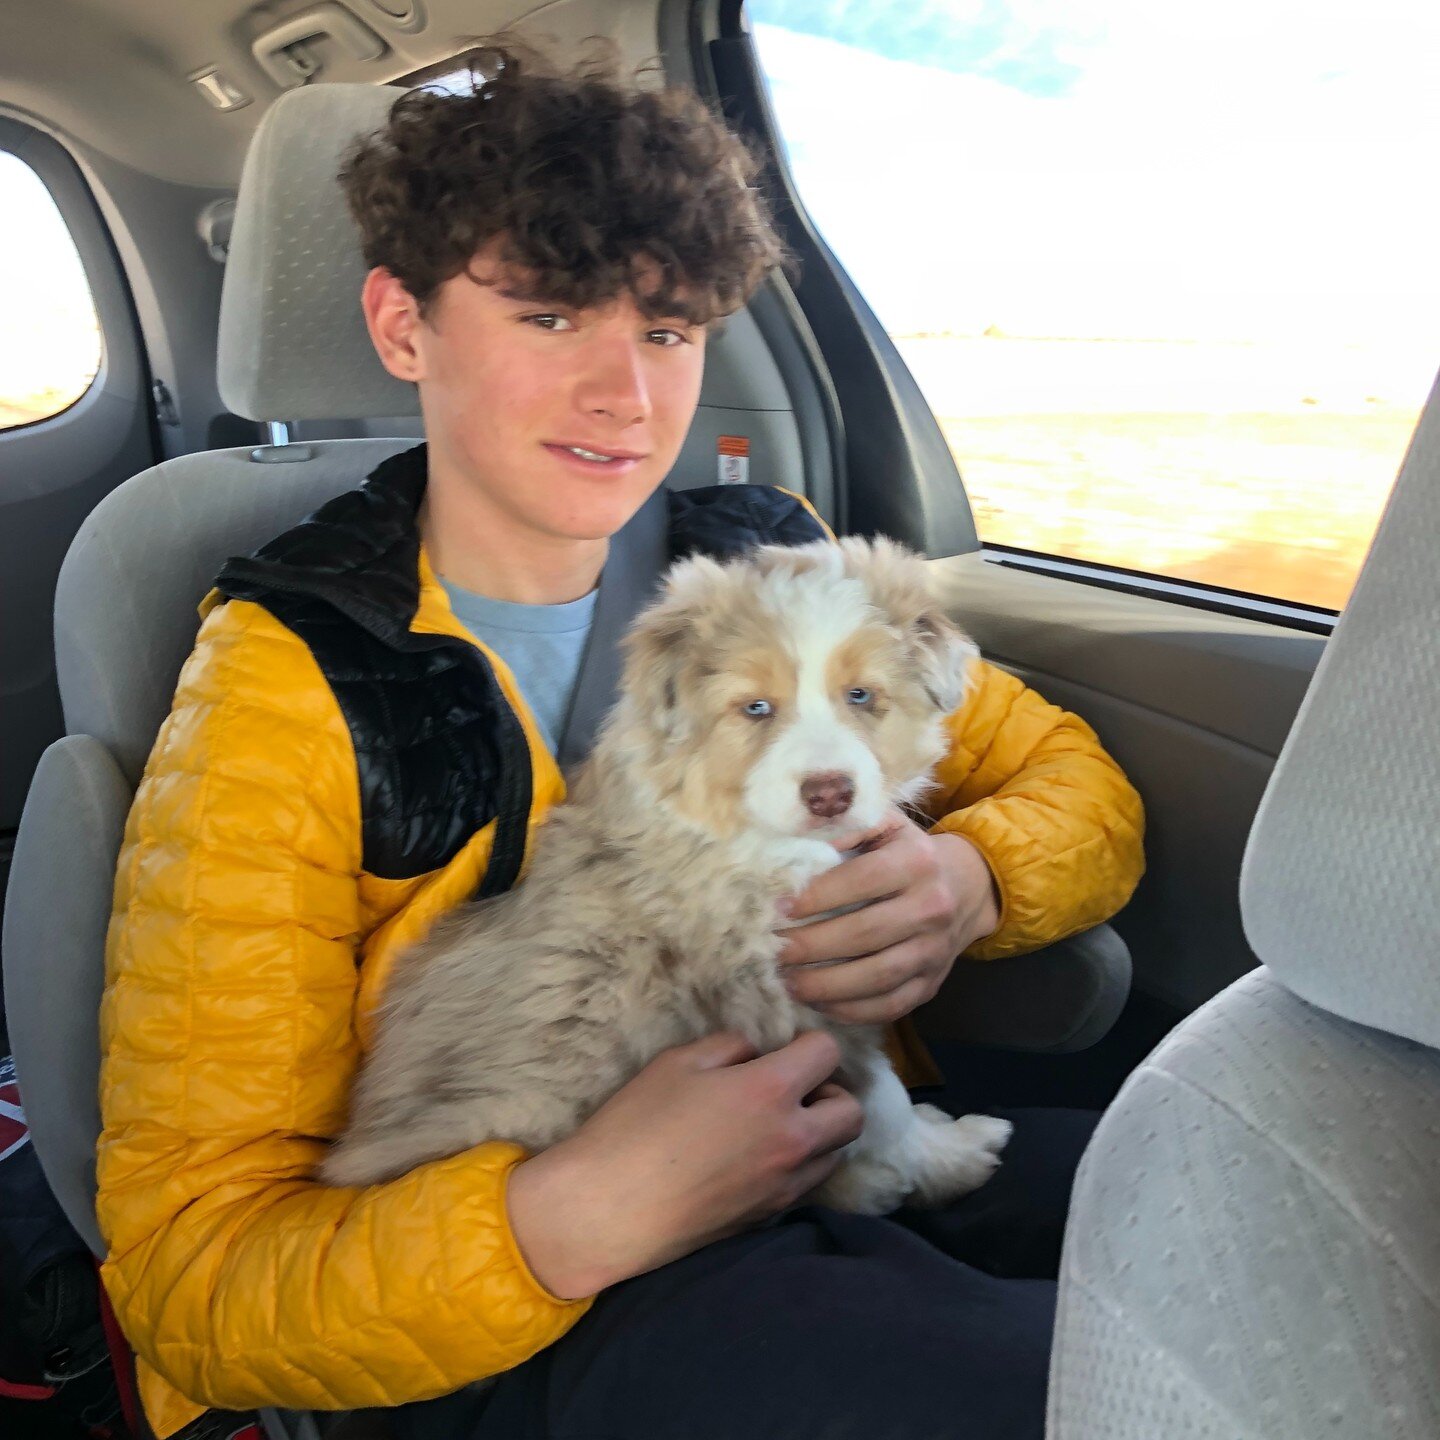 Two years ago today, we brought home Zuma. It was shortly after Magnus&rsquo;s beloved dog Oslo passed. Magnus didn&rsquo;t want to go through the rest of high school without a dog&hellip;so we found this goofy furball on a farm in Eastern Colorado.
